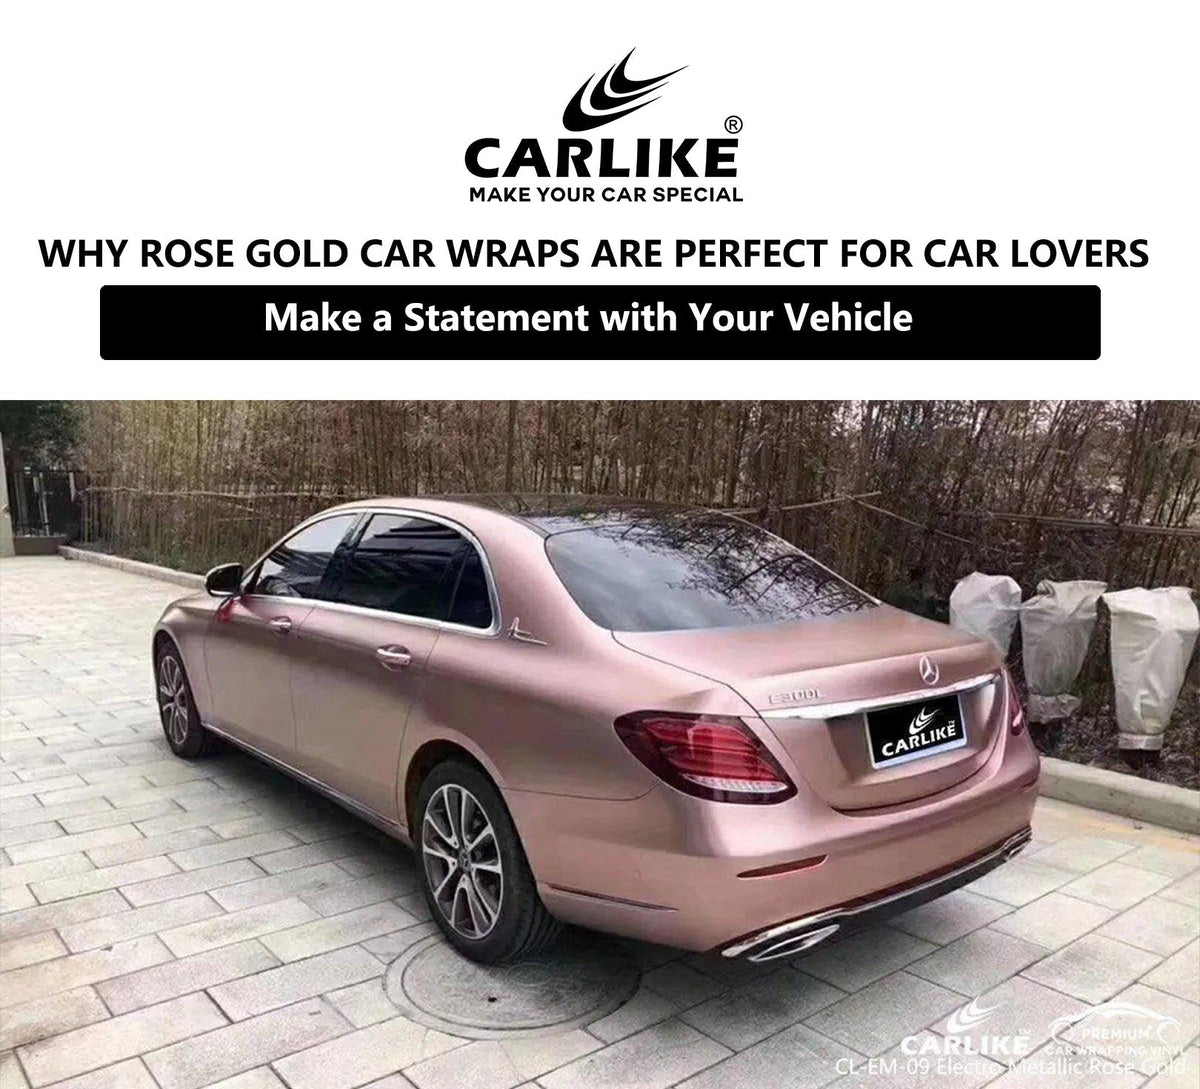 Make a Statement: Why Rose Gold Car Wraps Are Perfect – CARLIKE WRAP